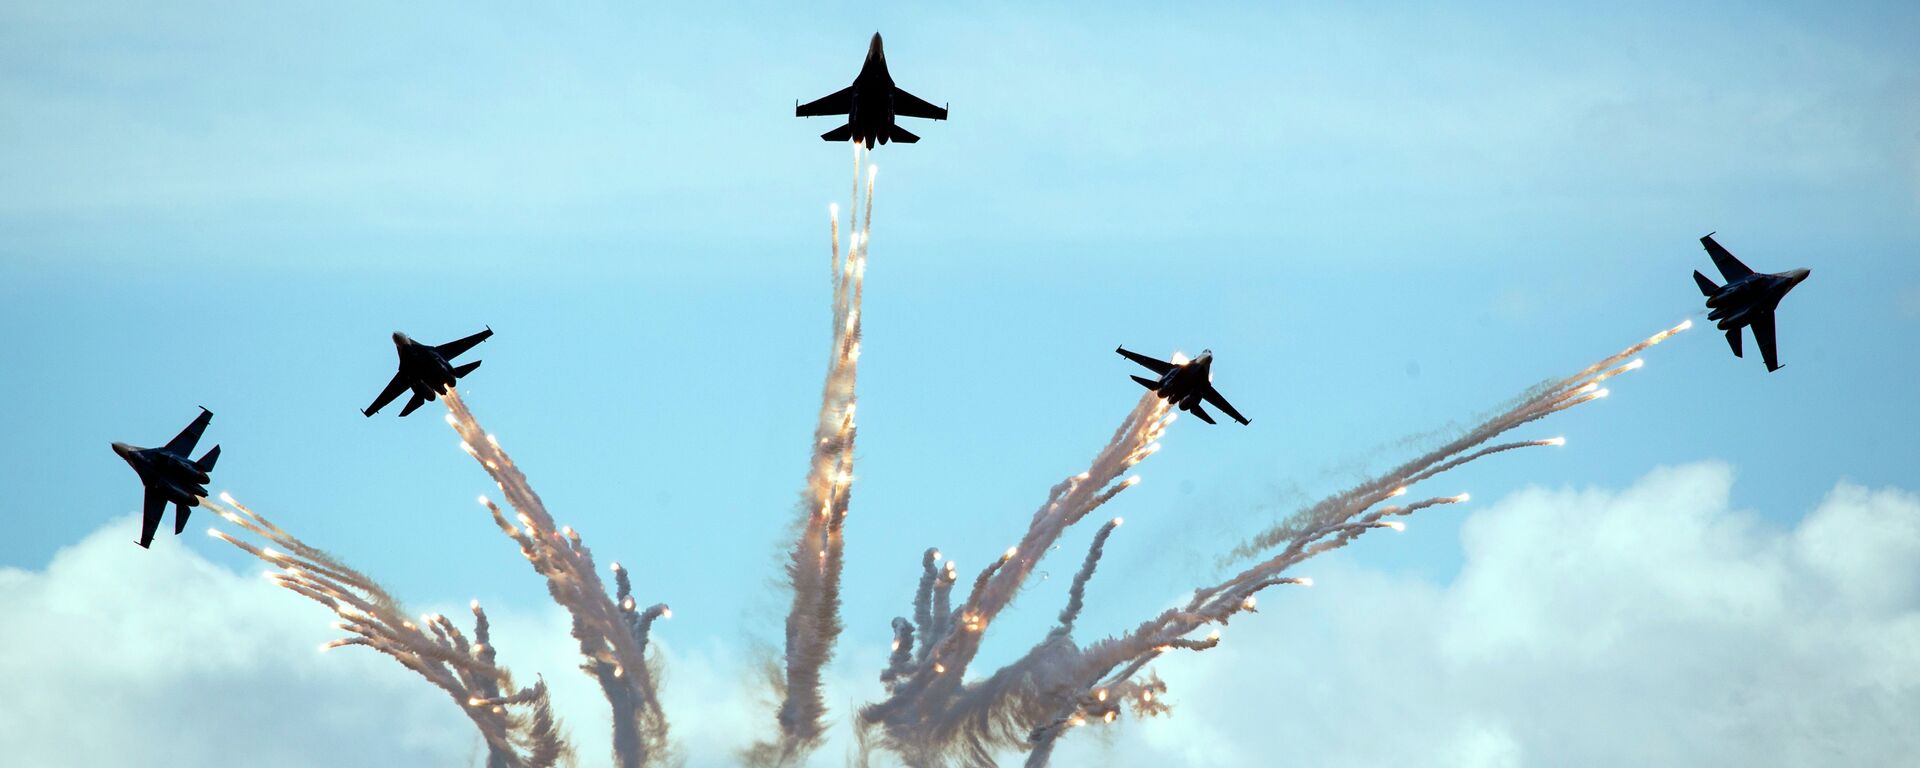 Su-27 jets of aerobatics team Russkiye Vityasy, or Russian Knights, perform during the MAKS-2015 International Aviation and Space Show in Zhukovsky, outside Moscow, Russia, Sunday, Aug. 30, 2015. - Sputnik India, 1920, 15.02.2023